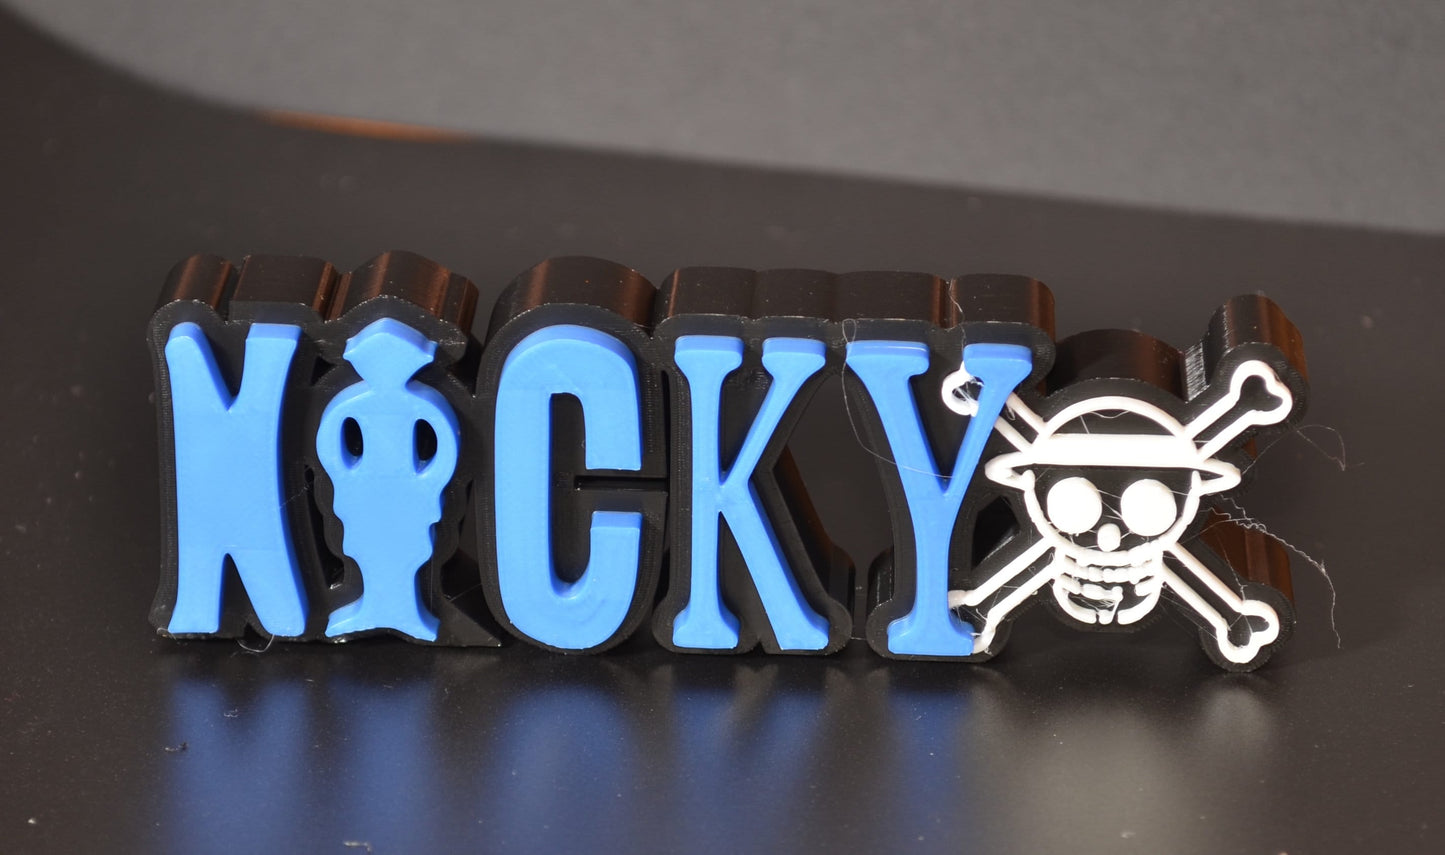 One Piece-Inspired Personalized Custom 3D-Printed Name Sign